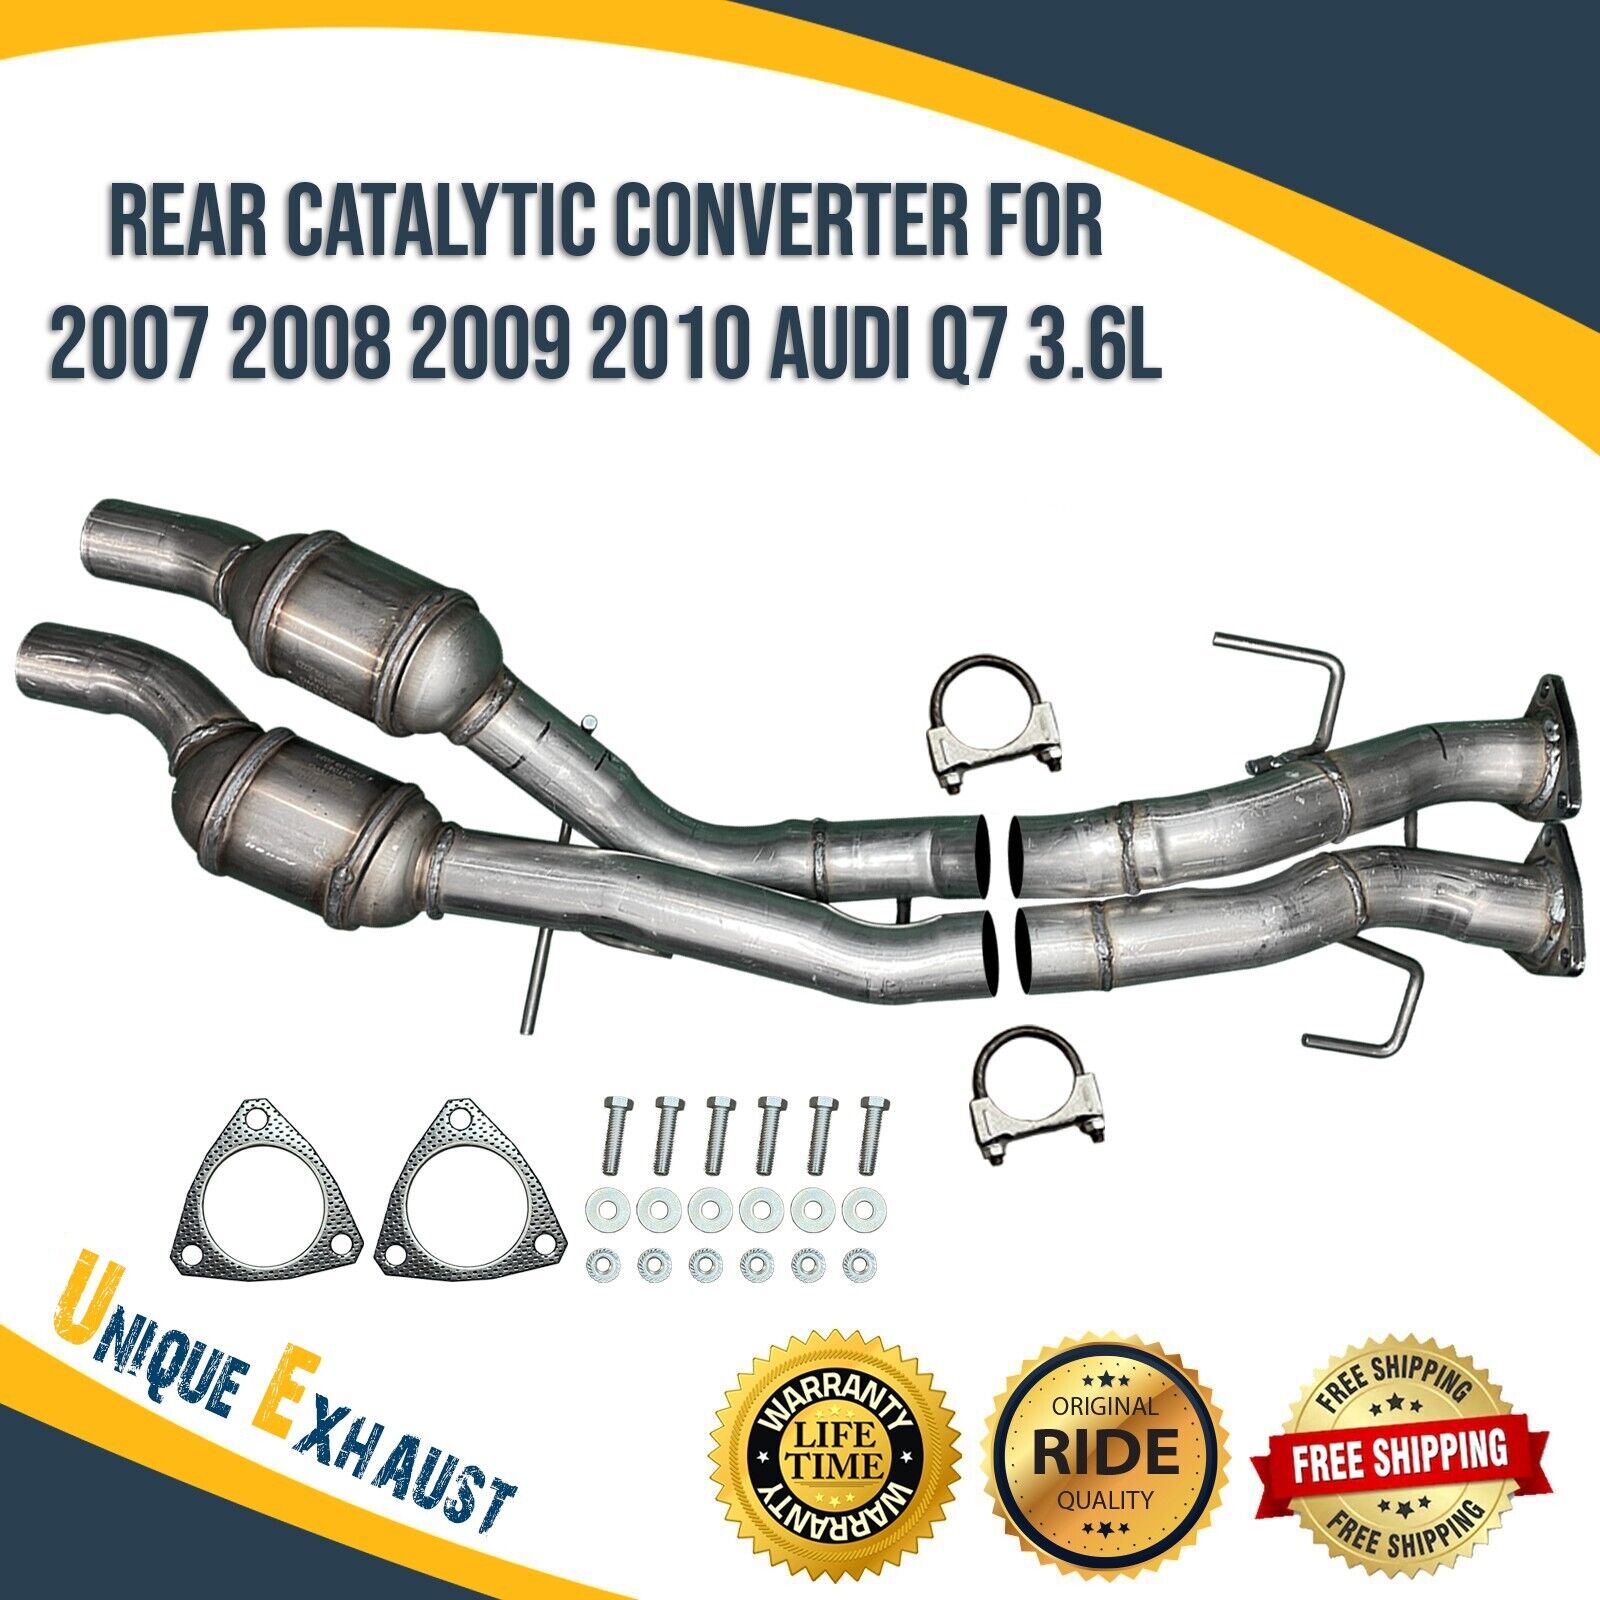 Rear Catalytic Converter for 2007 2008 2009 2010 Audi Q7 3.6L Fast Dispatch